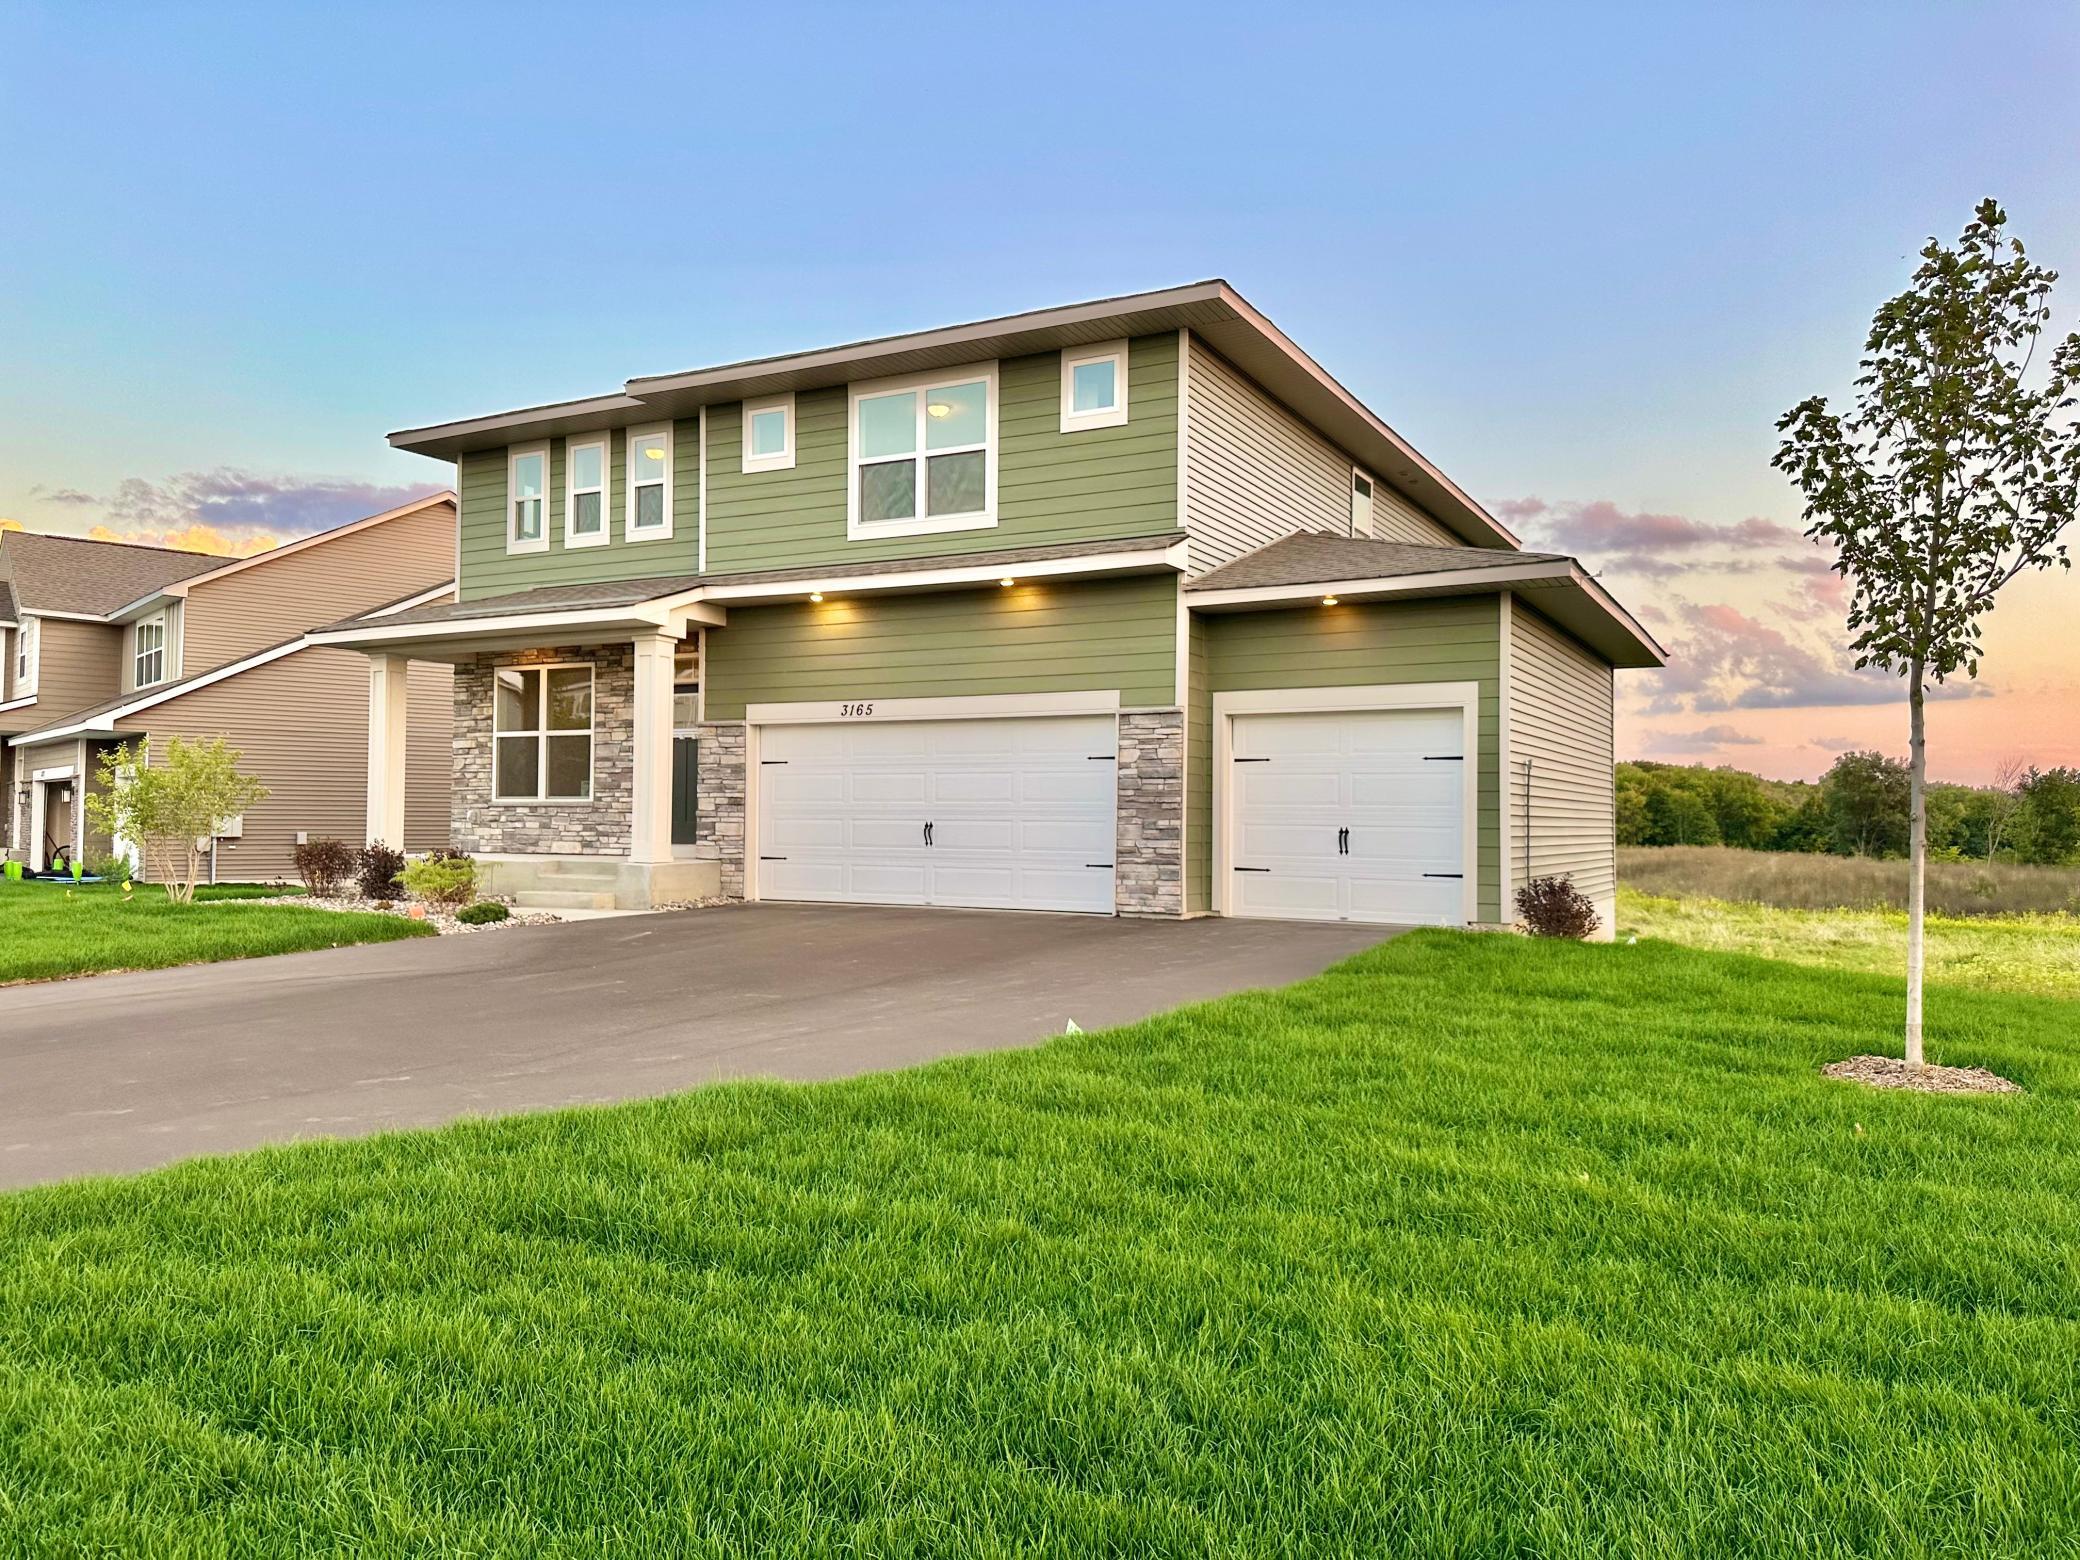 Welcome to 3165 Sunshine Curve! This Bridgewater home sits on a beautiful walk-out homesite backing up to wetlands. Home comes included with full sodded yard, Smart irrigation and landscaping! Ready to move-in and call home now!